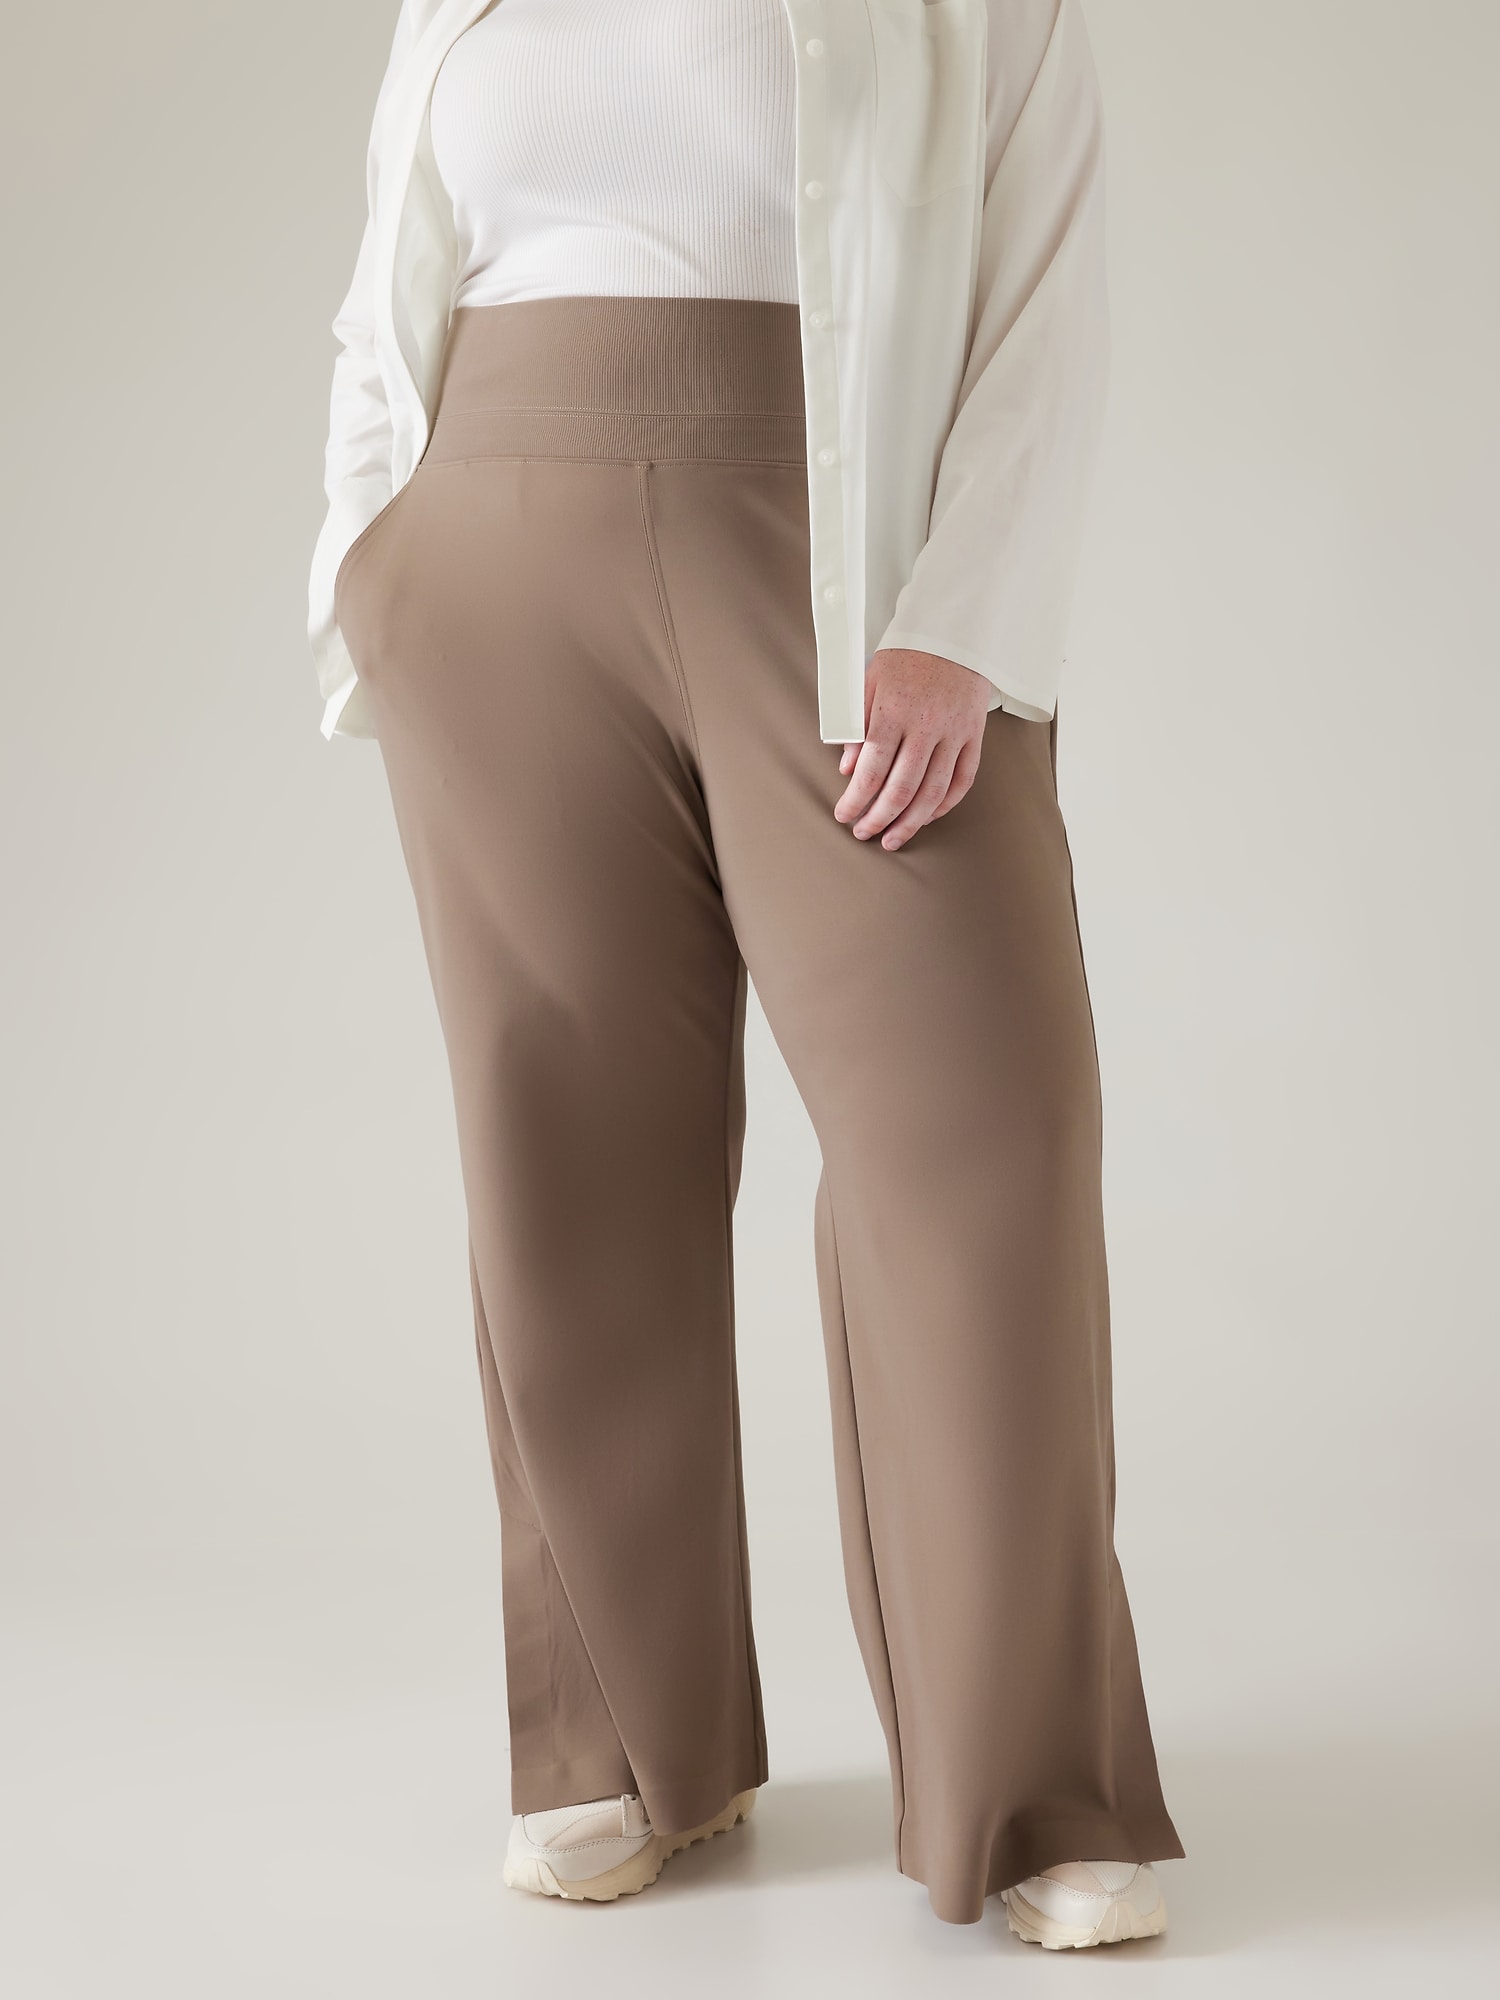 Athleta PLUS 2X Venice Flare Pant Mahogany Brown Pull-on Pants Stretch  Flared